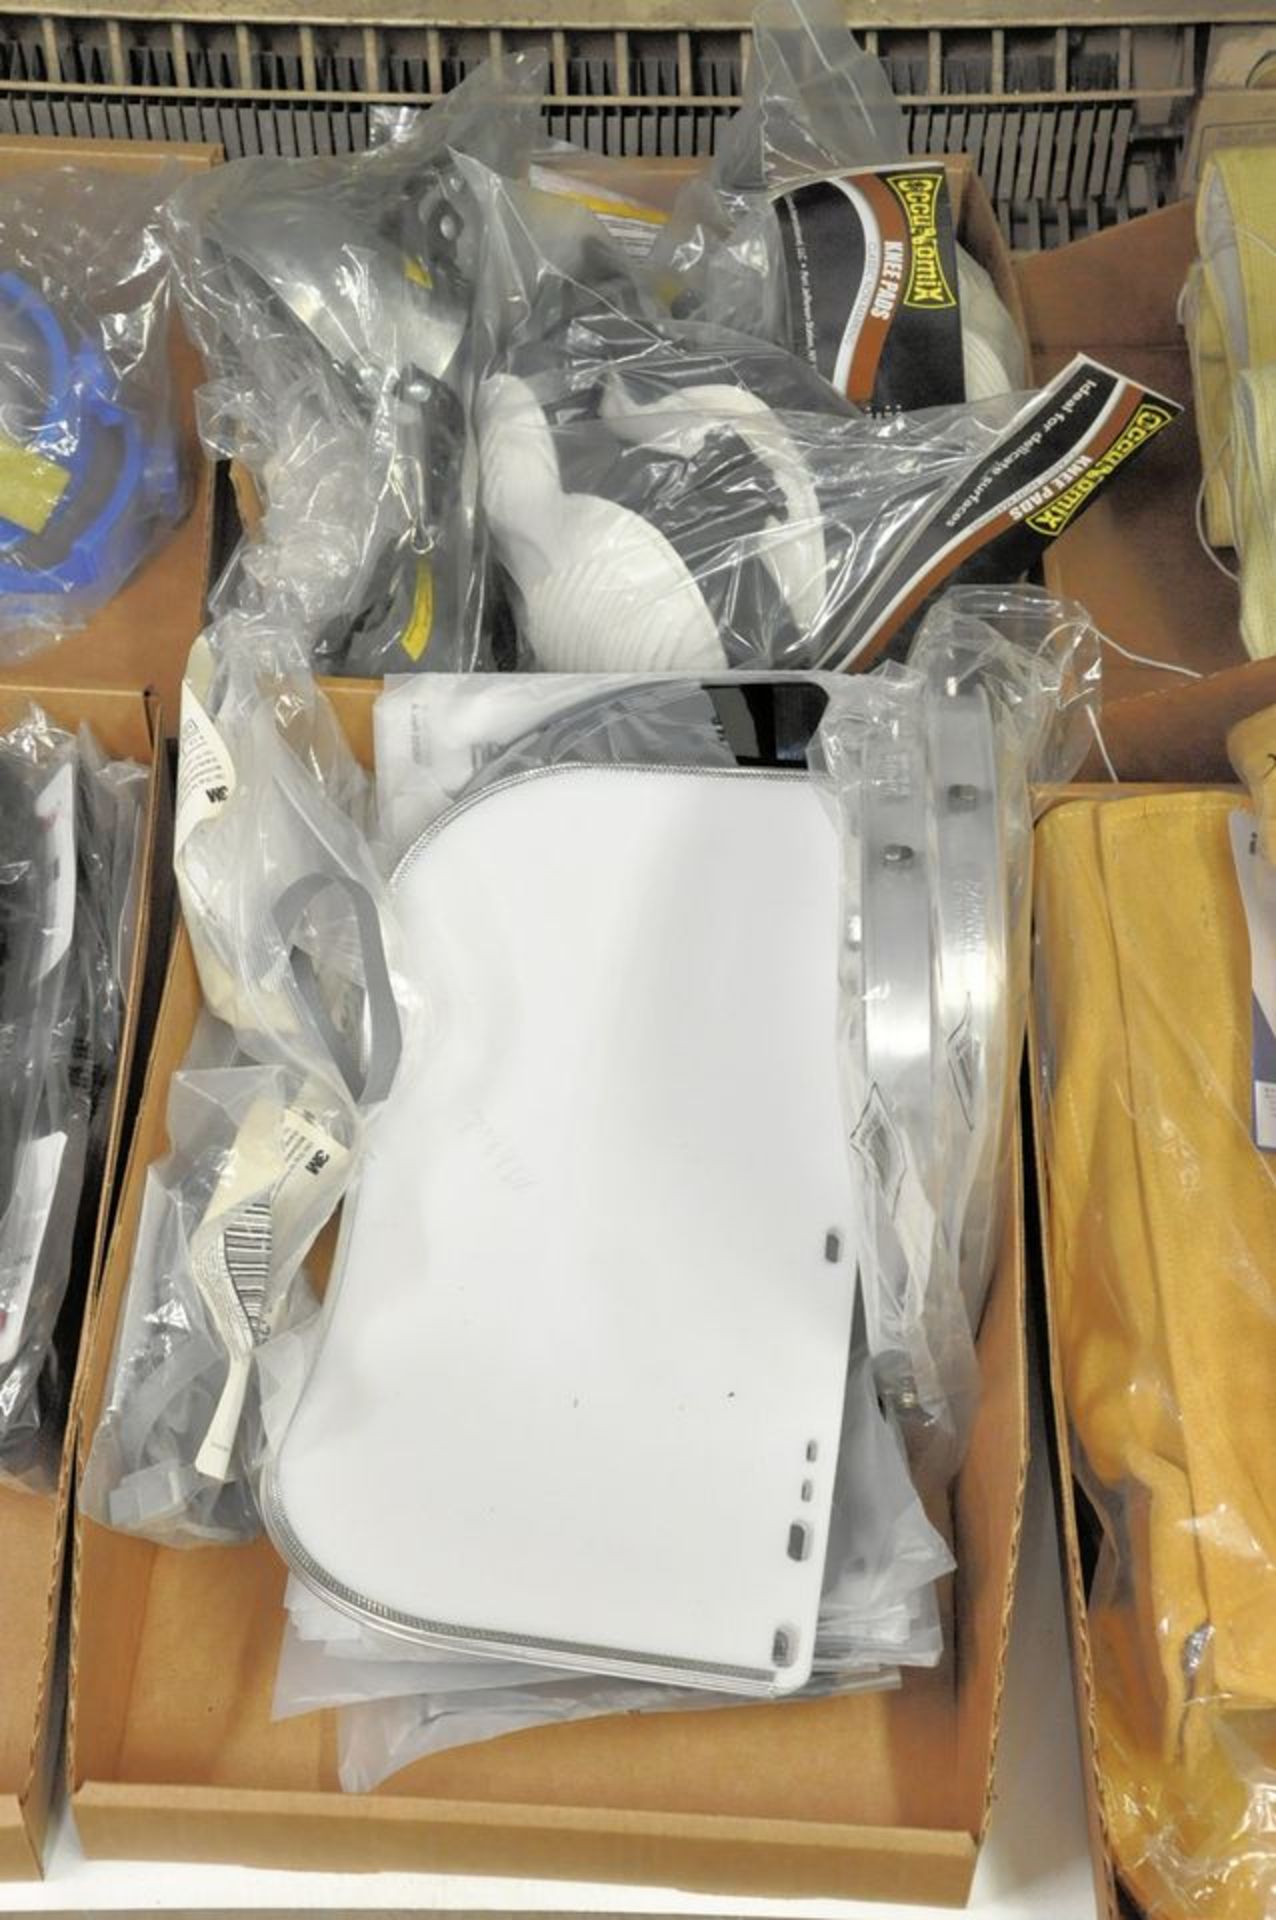 Lot - Various Safety Apparel, Safety Glasses, Dust Masks, Face Masks, Knee Pads, Shields, etc. in ( - Image 6 of 6